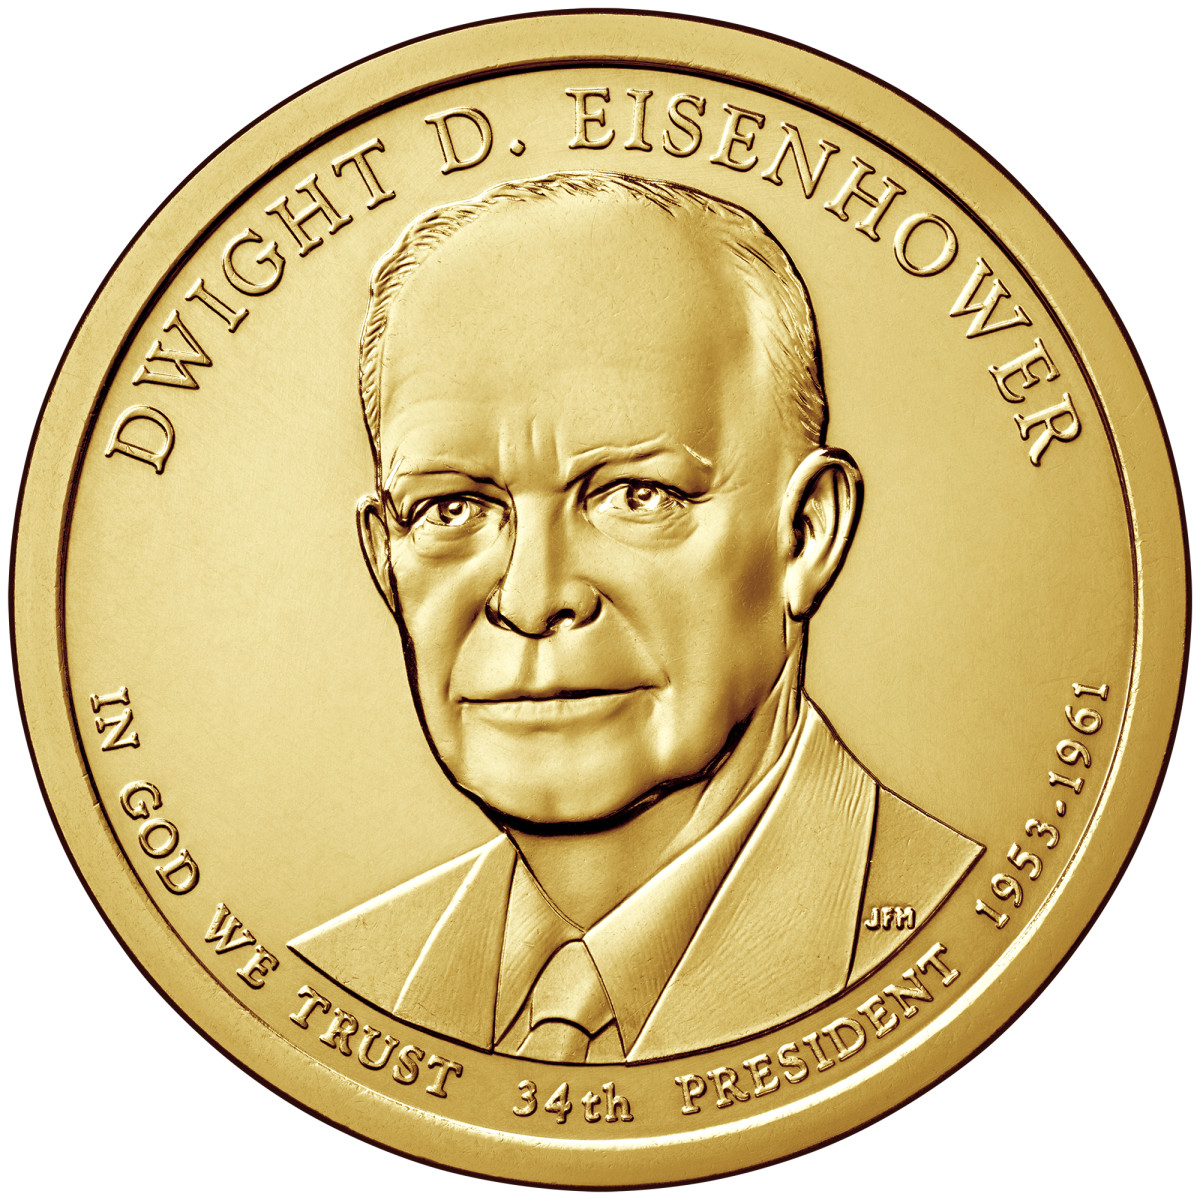 The Mint has lowered the household order limit to 2 sets for the Eisenhower Coin and Chronicles set (uncirculated Eisenhower dollar shown here).